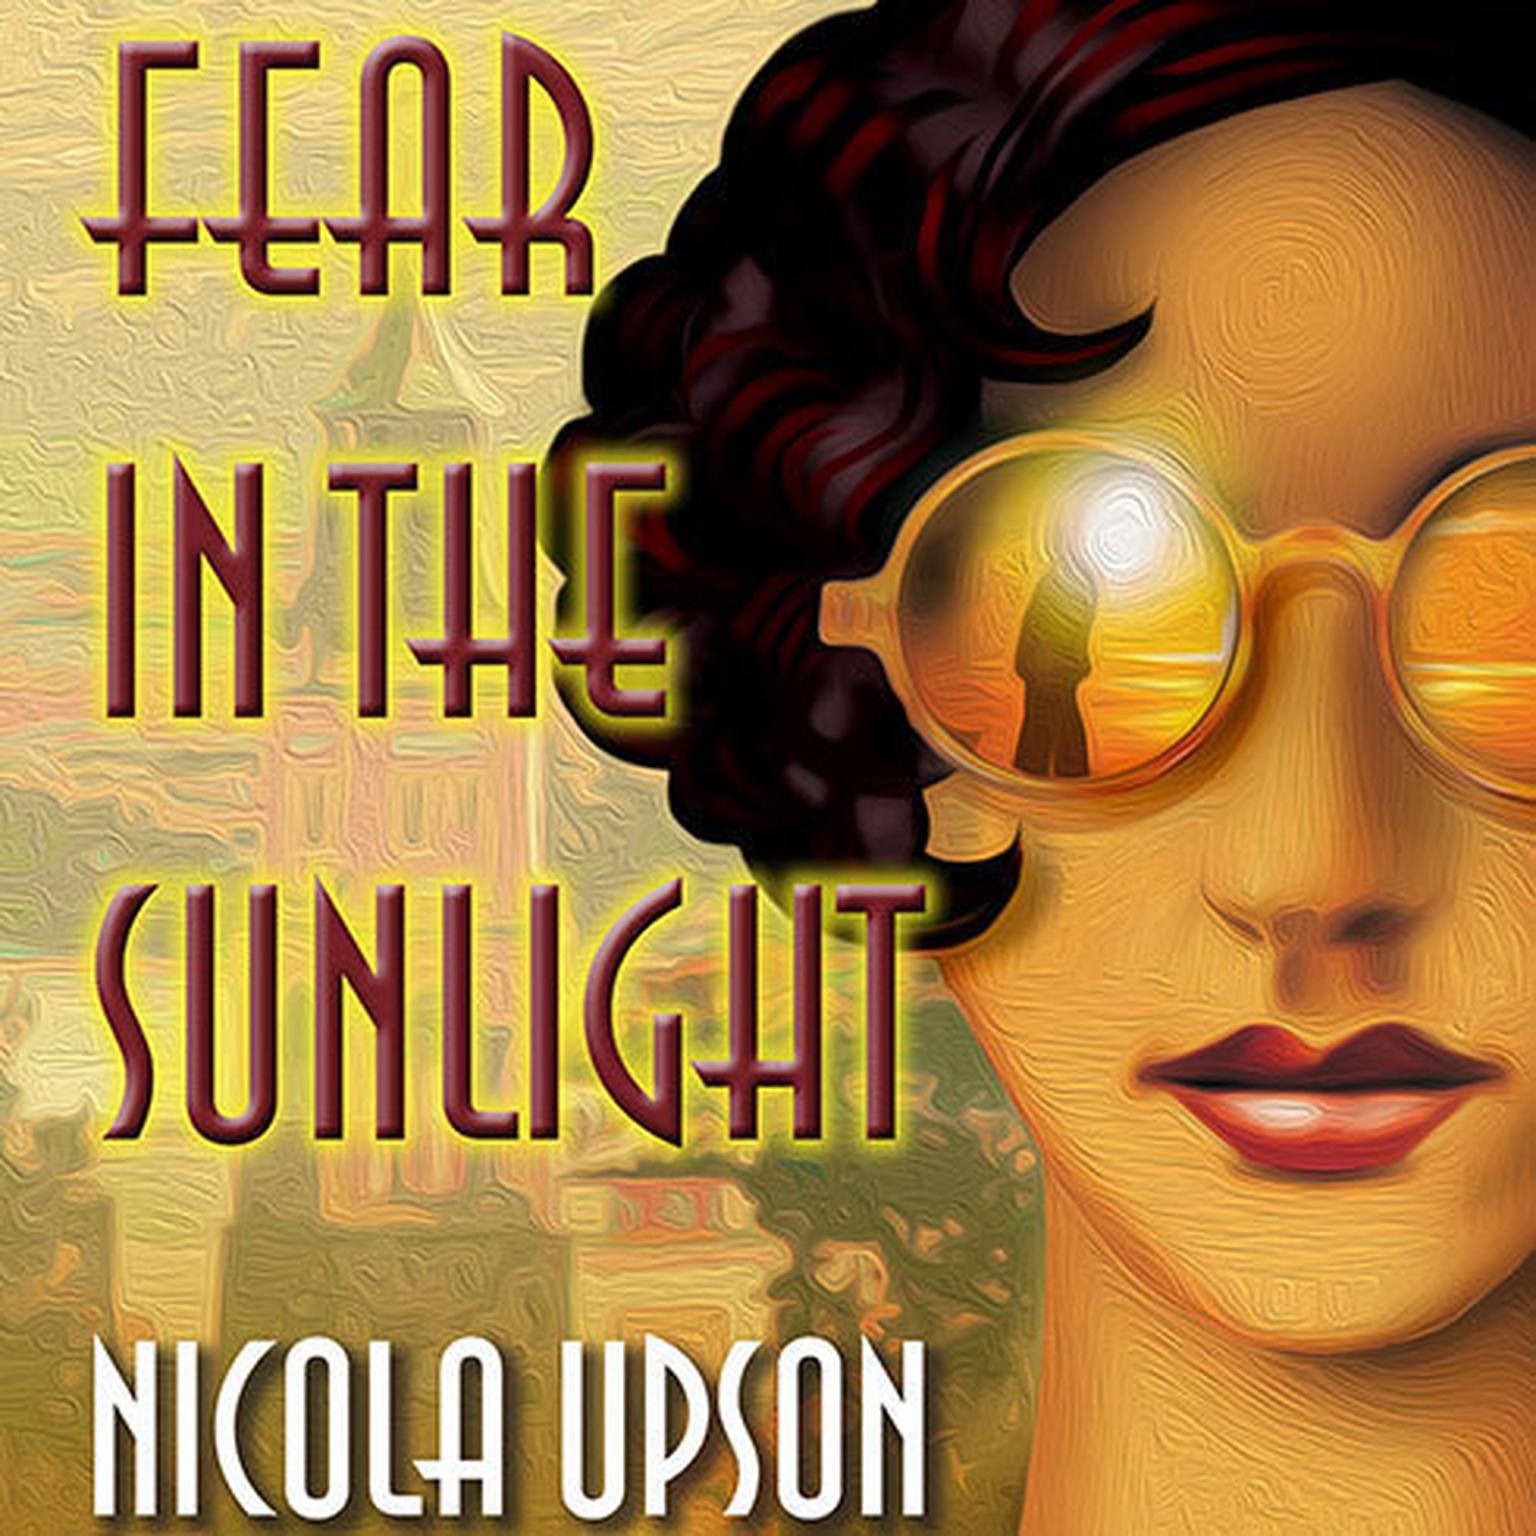 Fear in the Sunlight Audiobook, by Nicola Upson